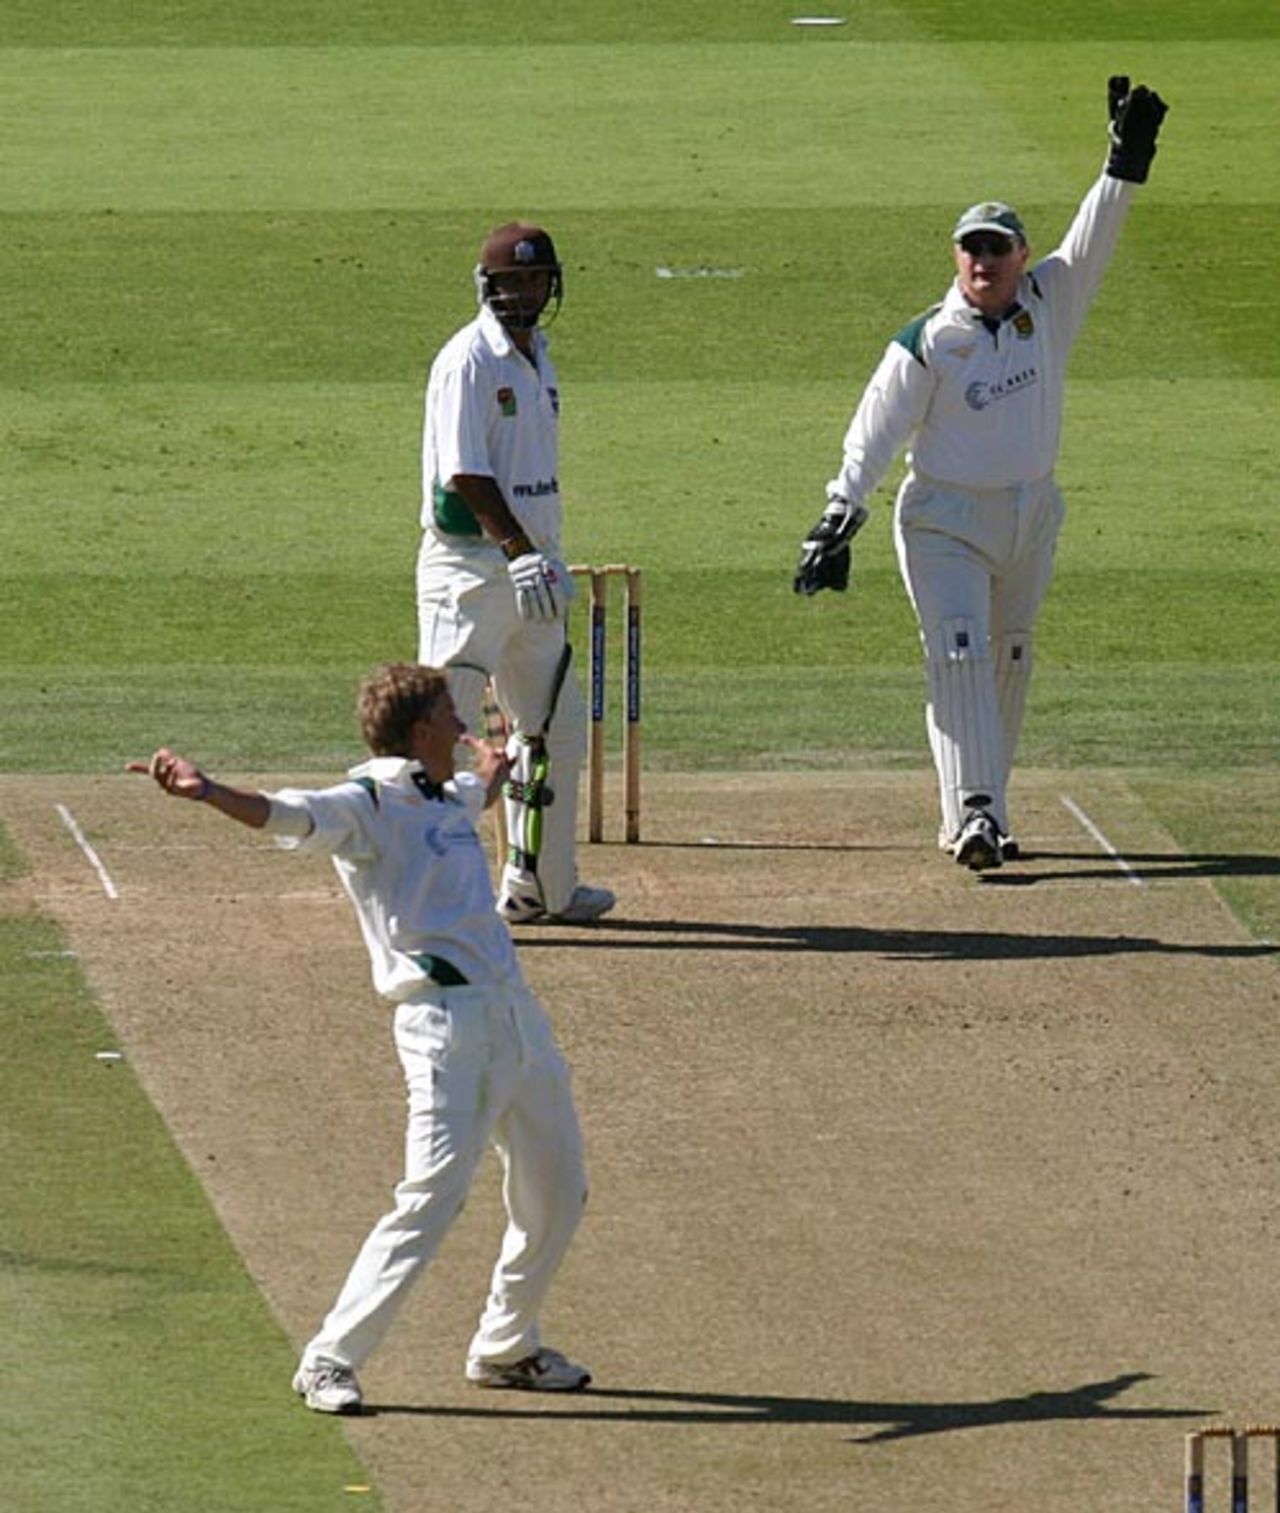 The breakthrough ... Nadeem Shahid holes out to mid-on off Nick Ferraby, Bromley v Kibworth, Cockspur Cup final, Lord's, September 11, 2007